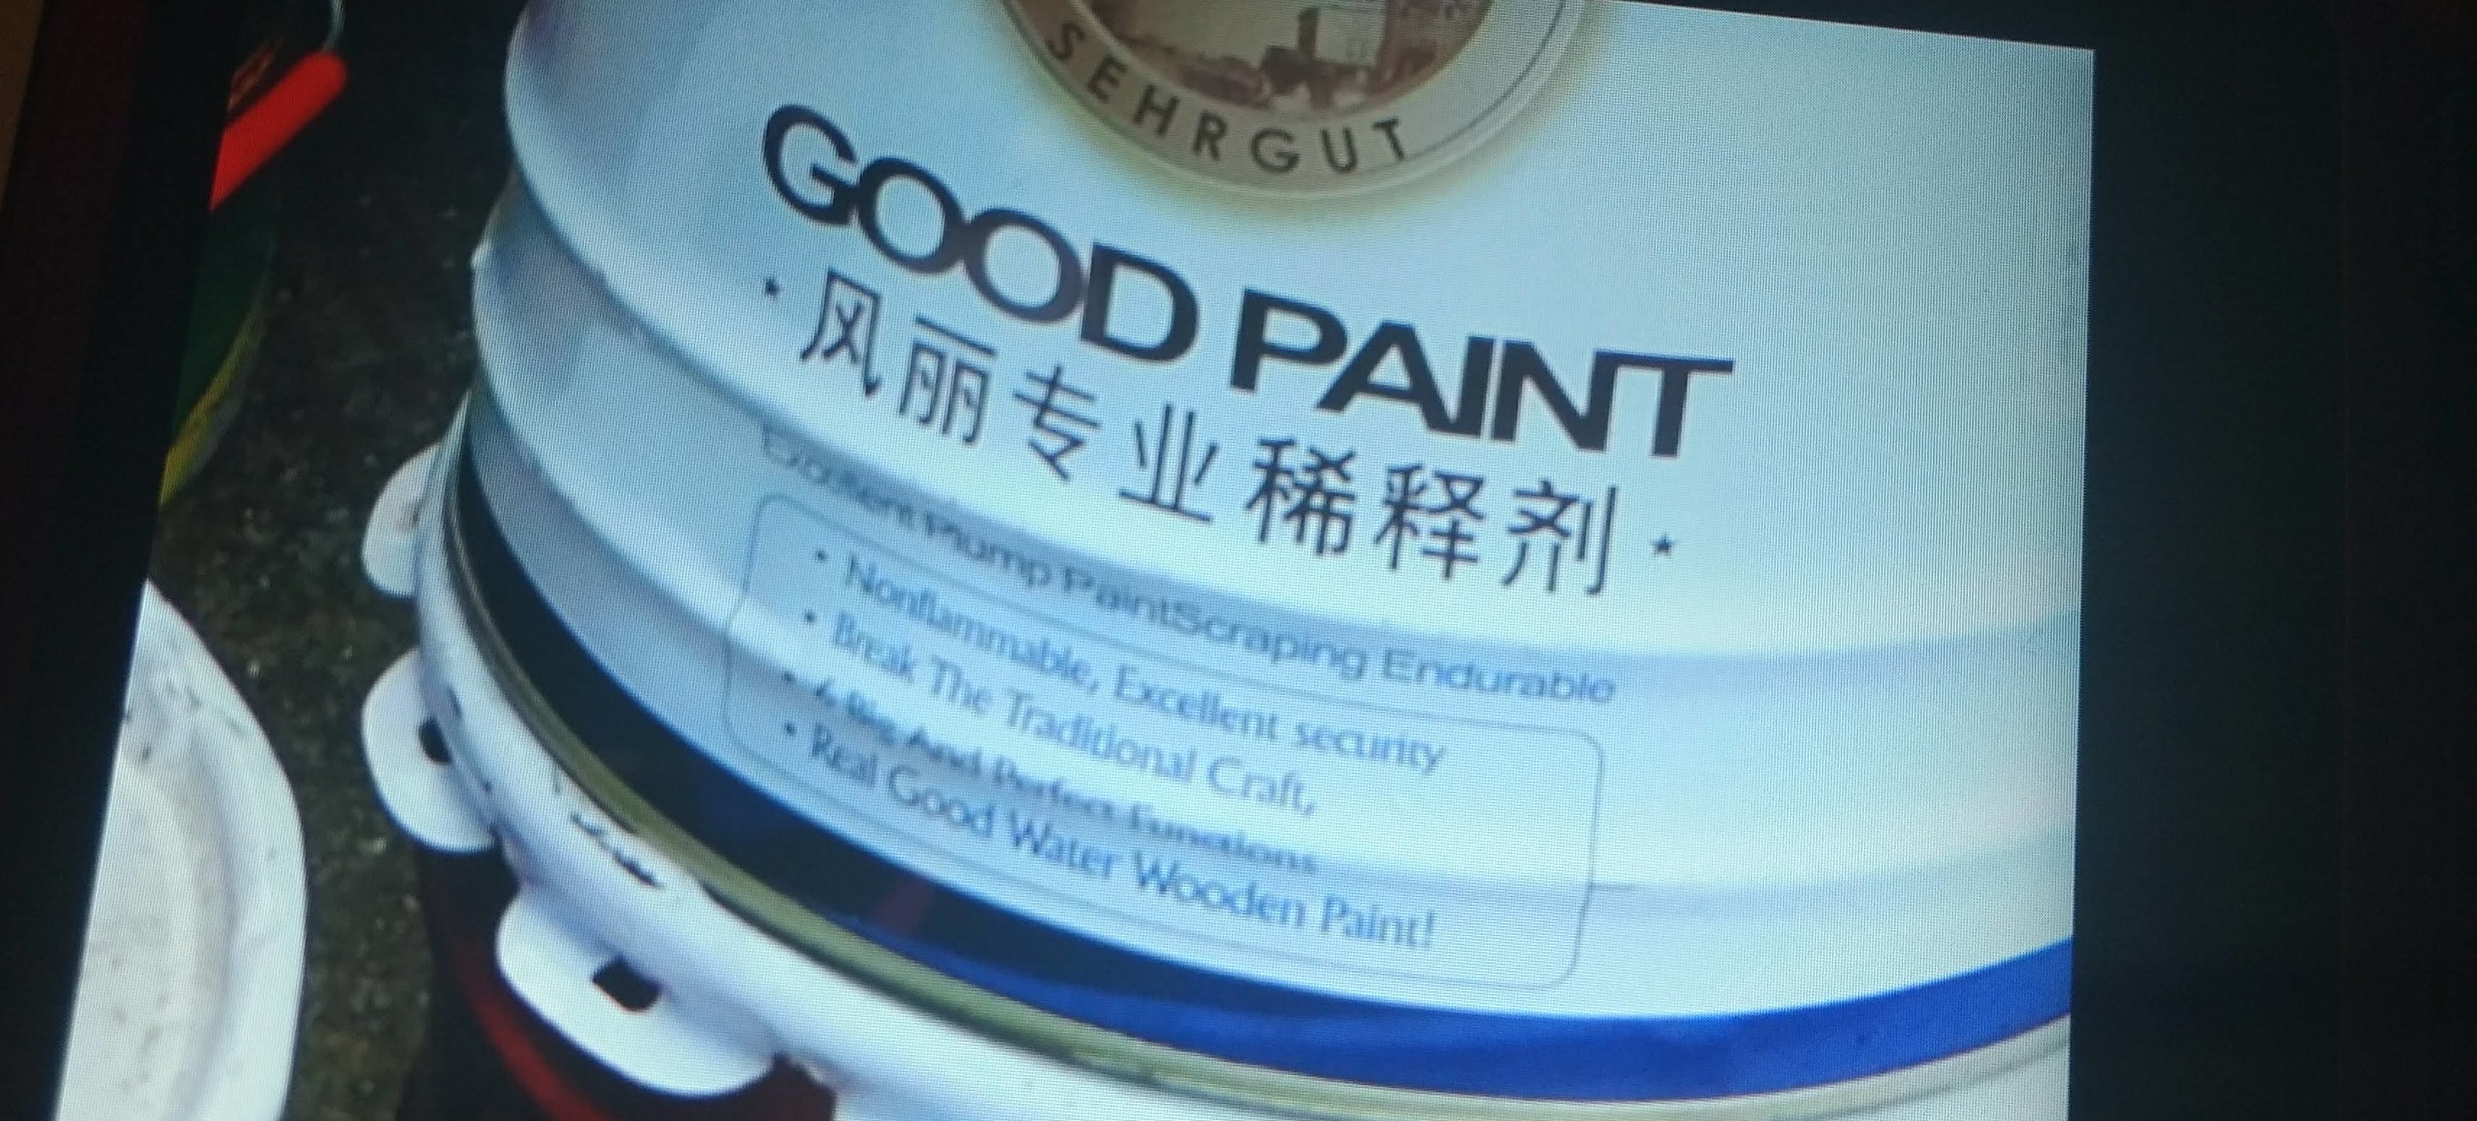 This bucket contained turpentine NOT paint